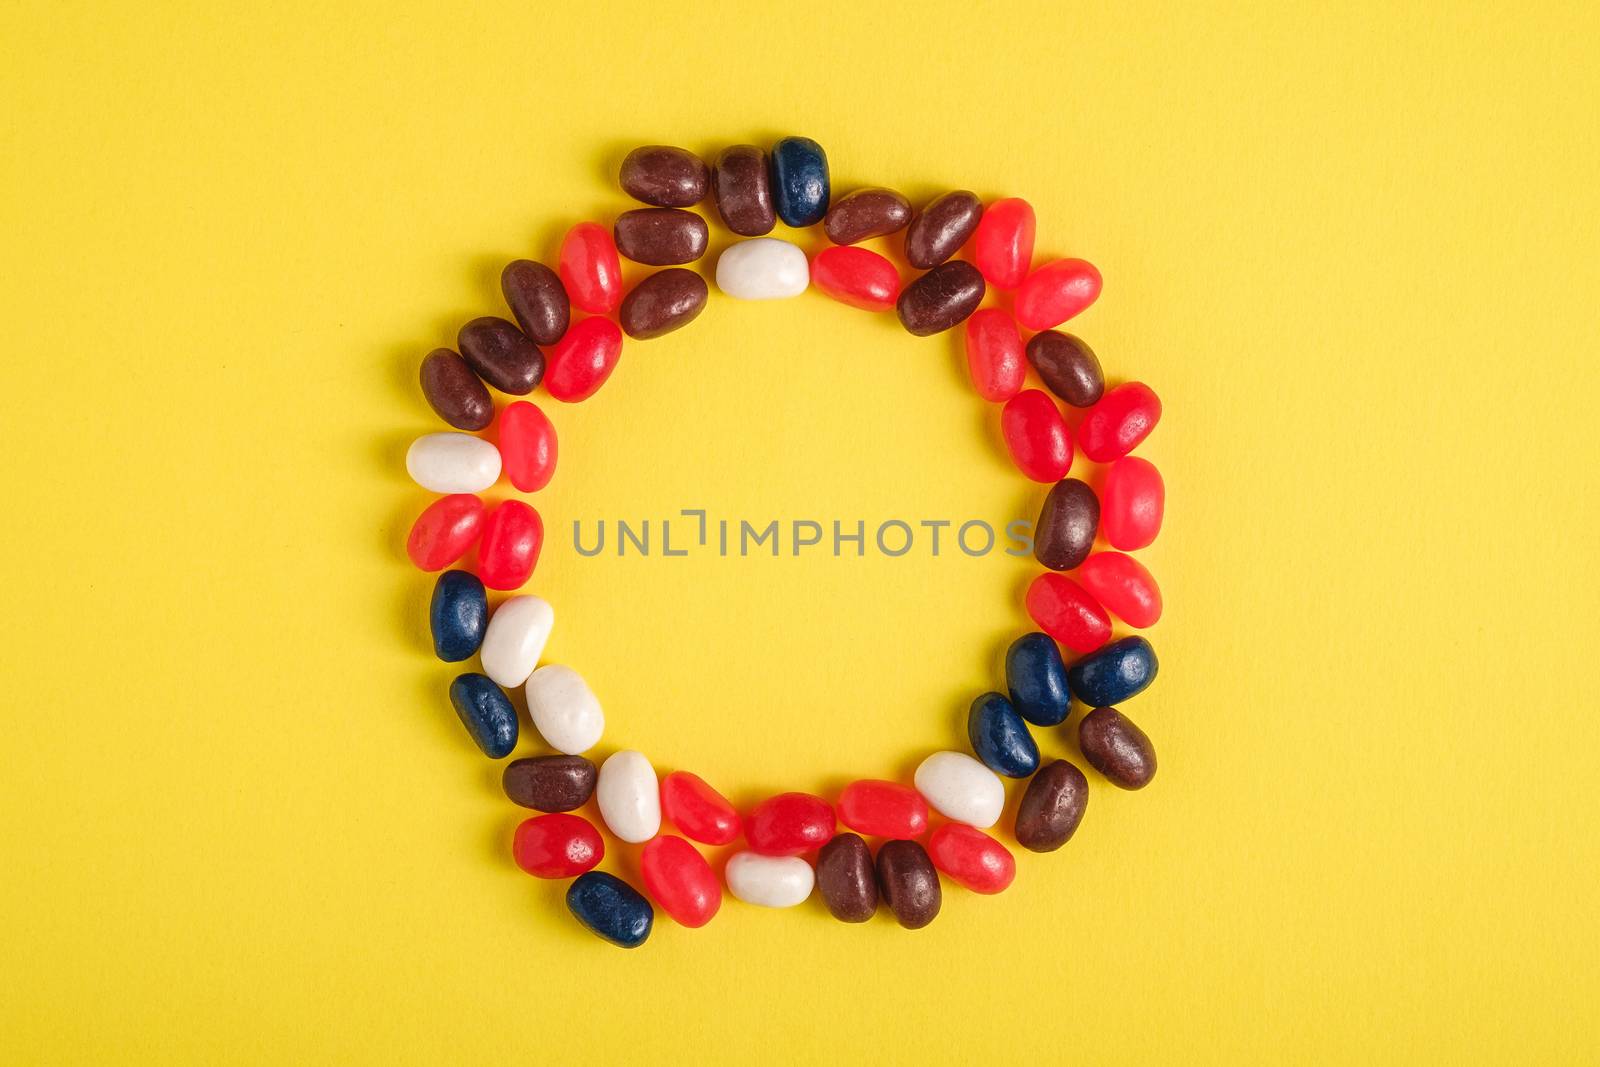 Round frame of juicy sweet fruit colorful jelly beans on bright yellow background, top view copy space